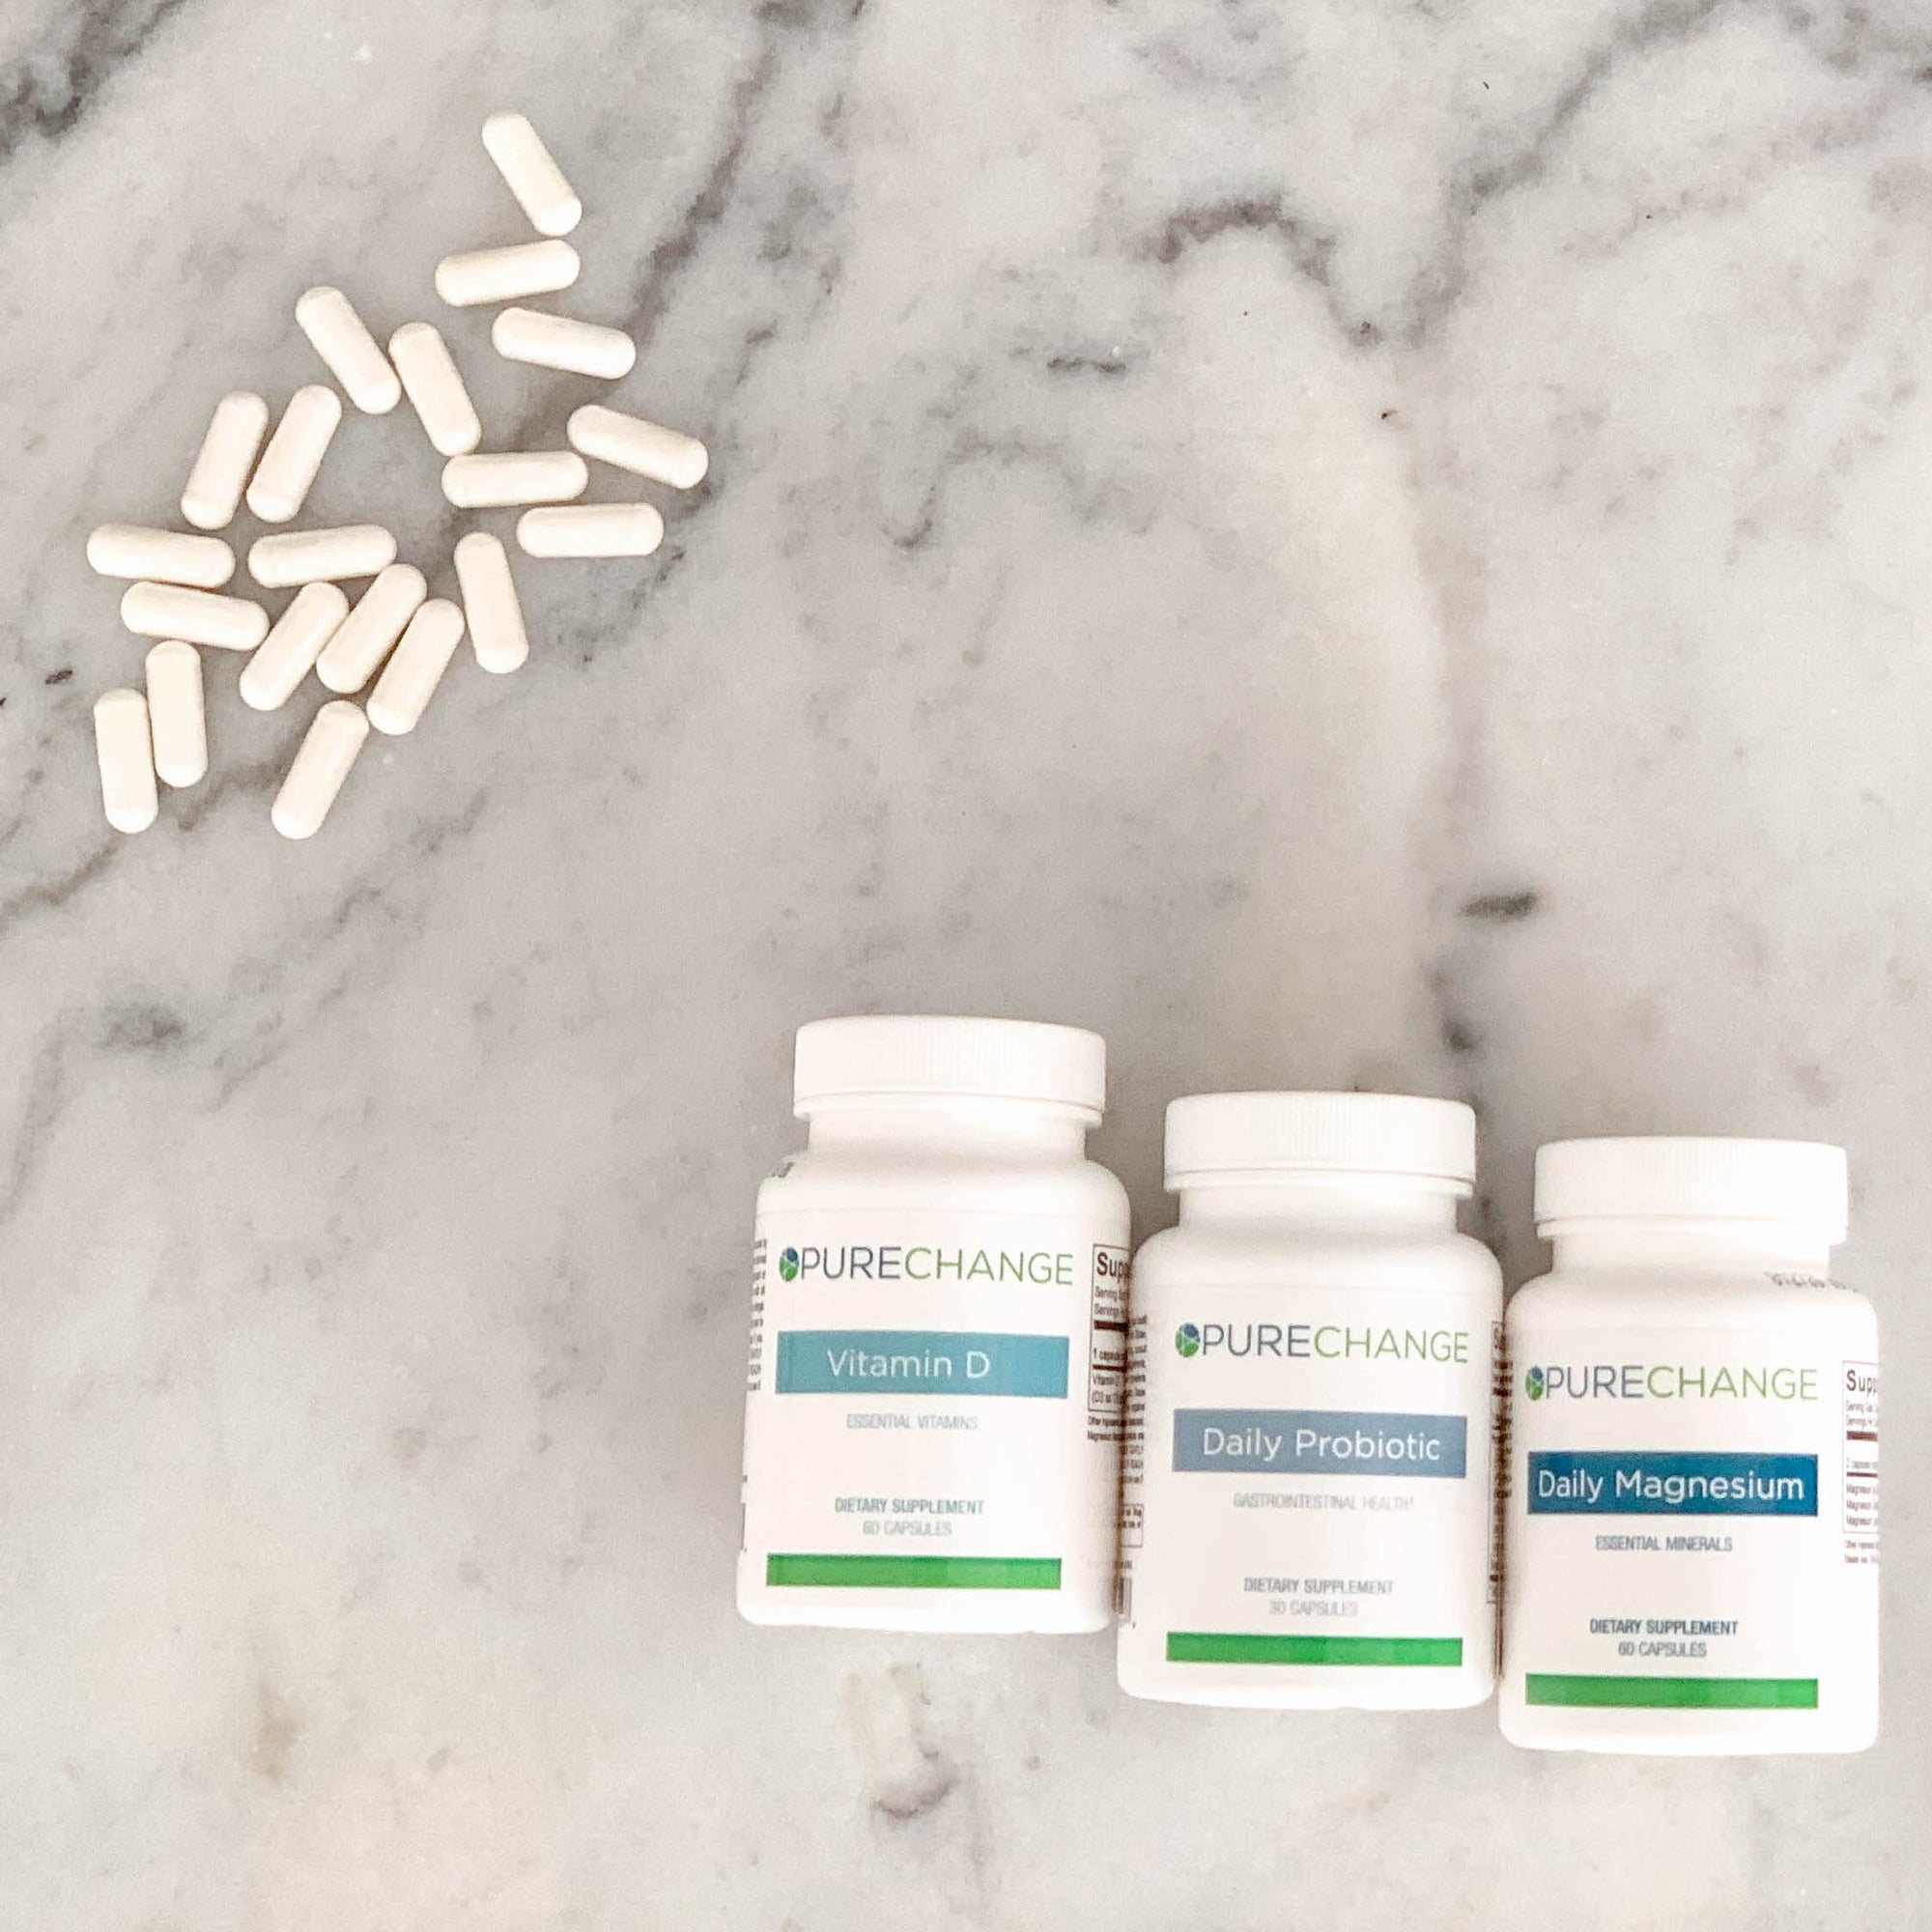 7 Benefits of Taking a Magnesium Supplement